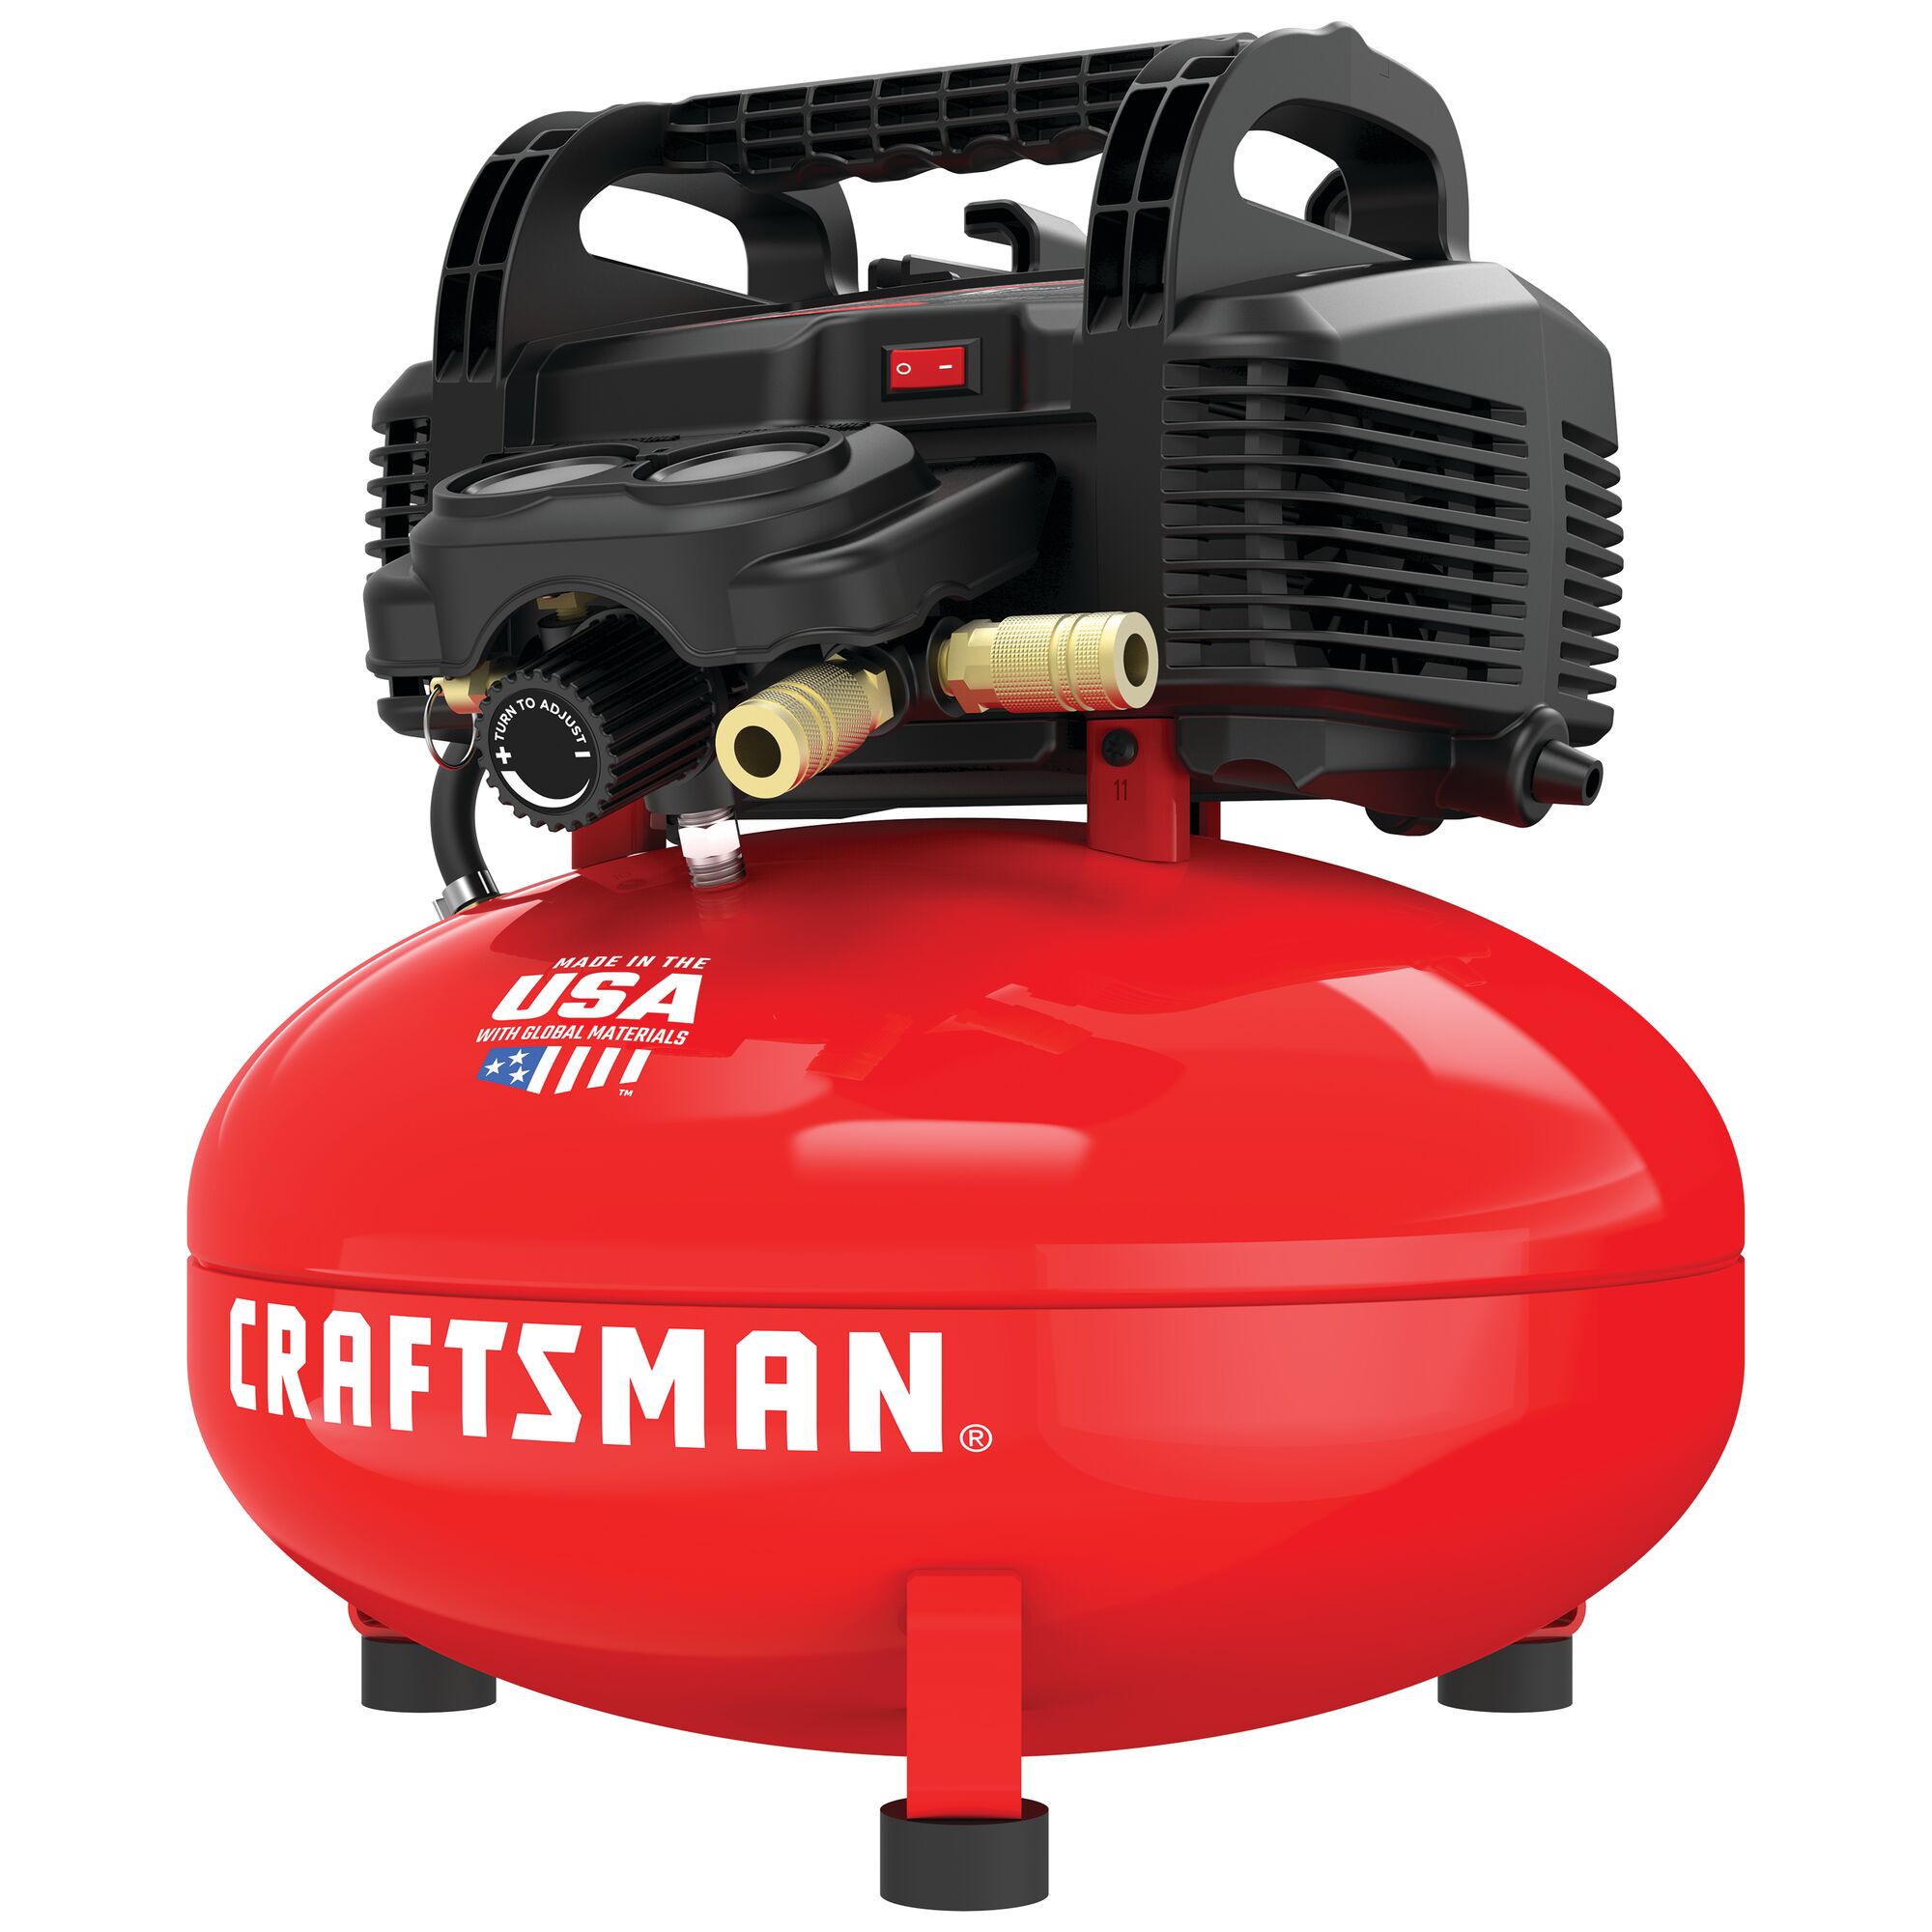 CRAFTSMAN 6-Gallons Portable 150 PSI Pancake Air Compressor in the